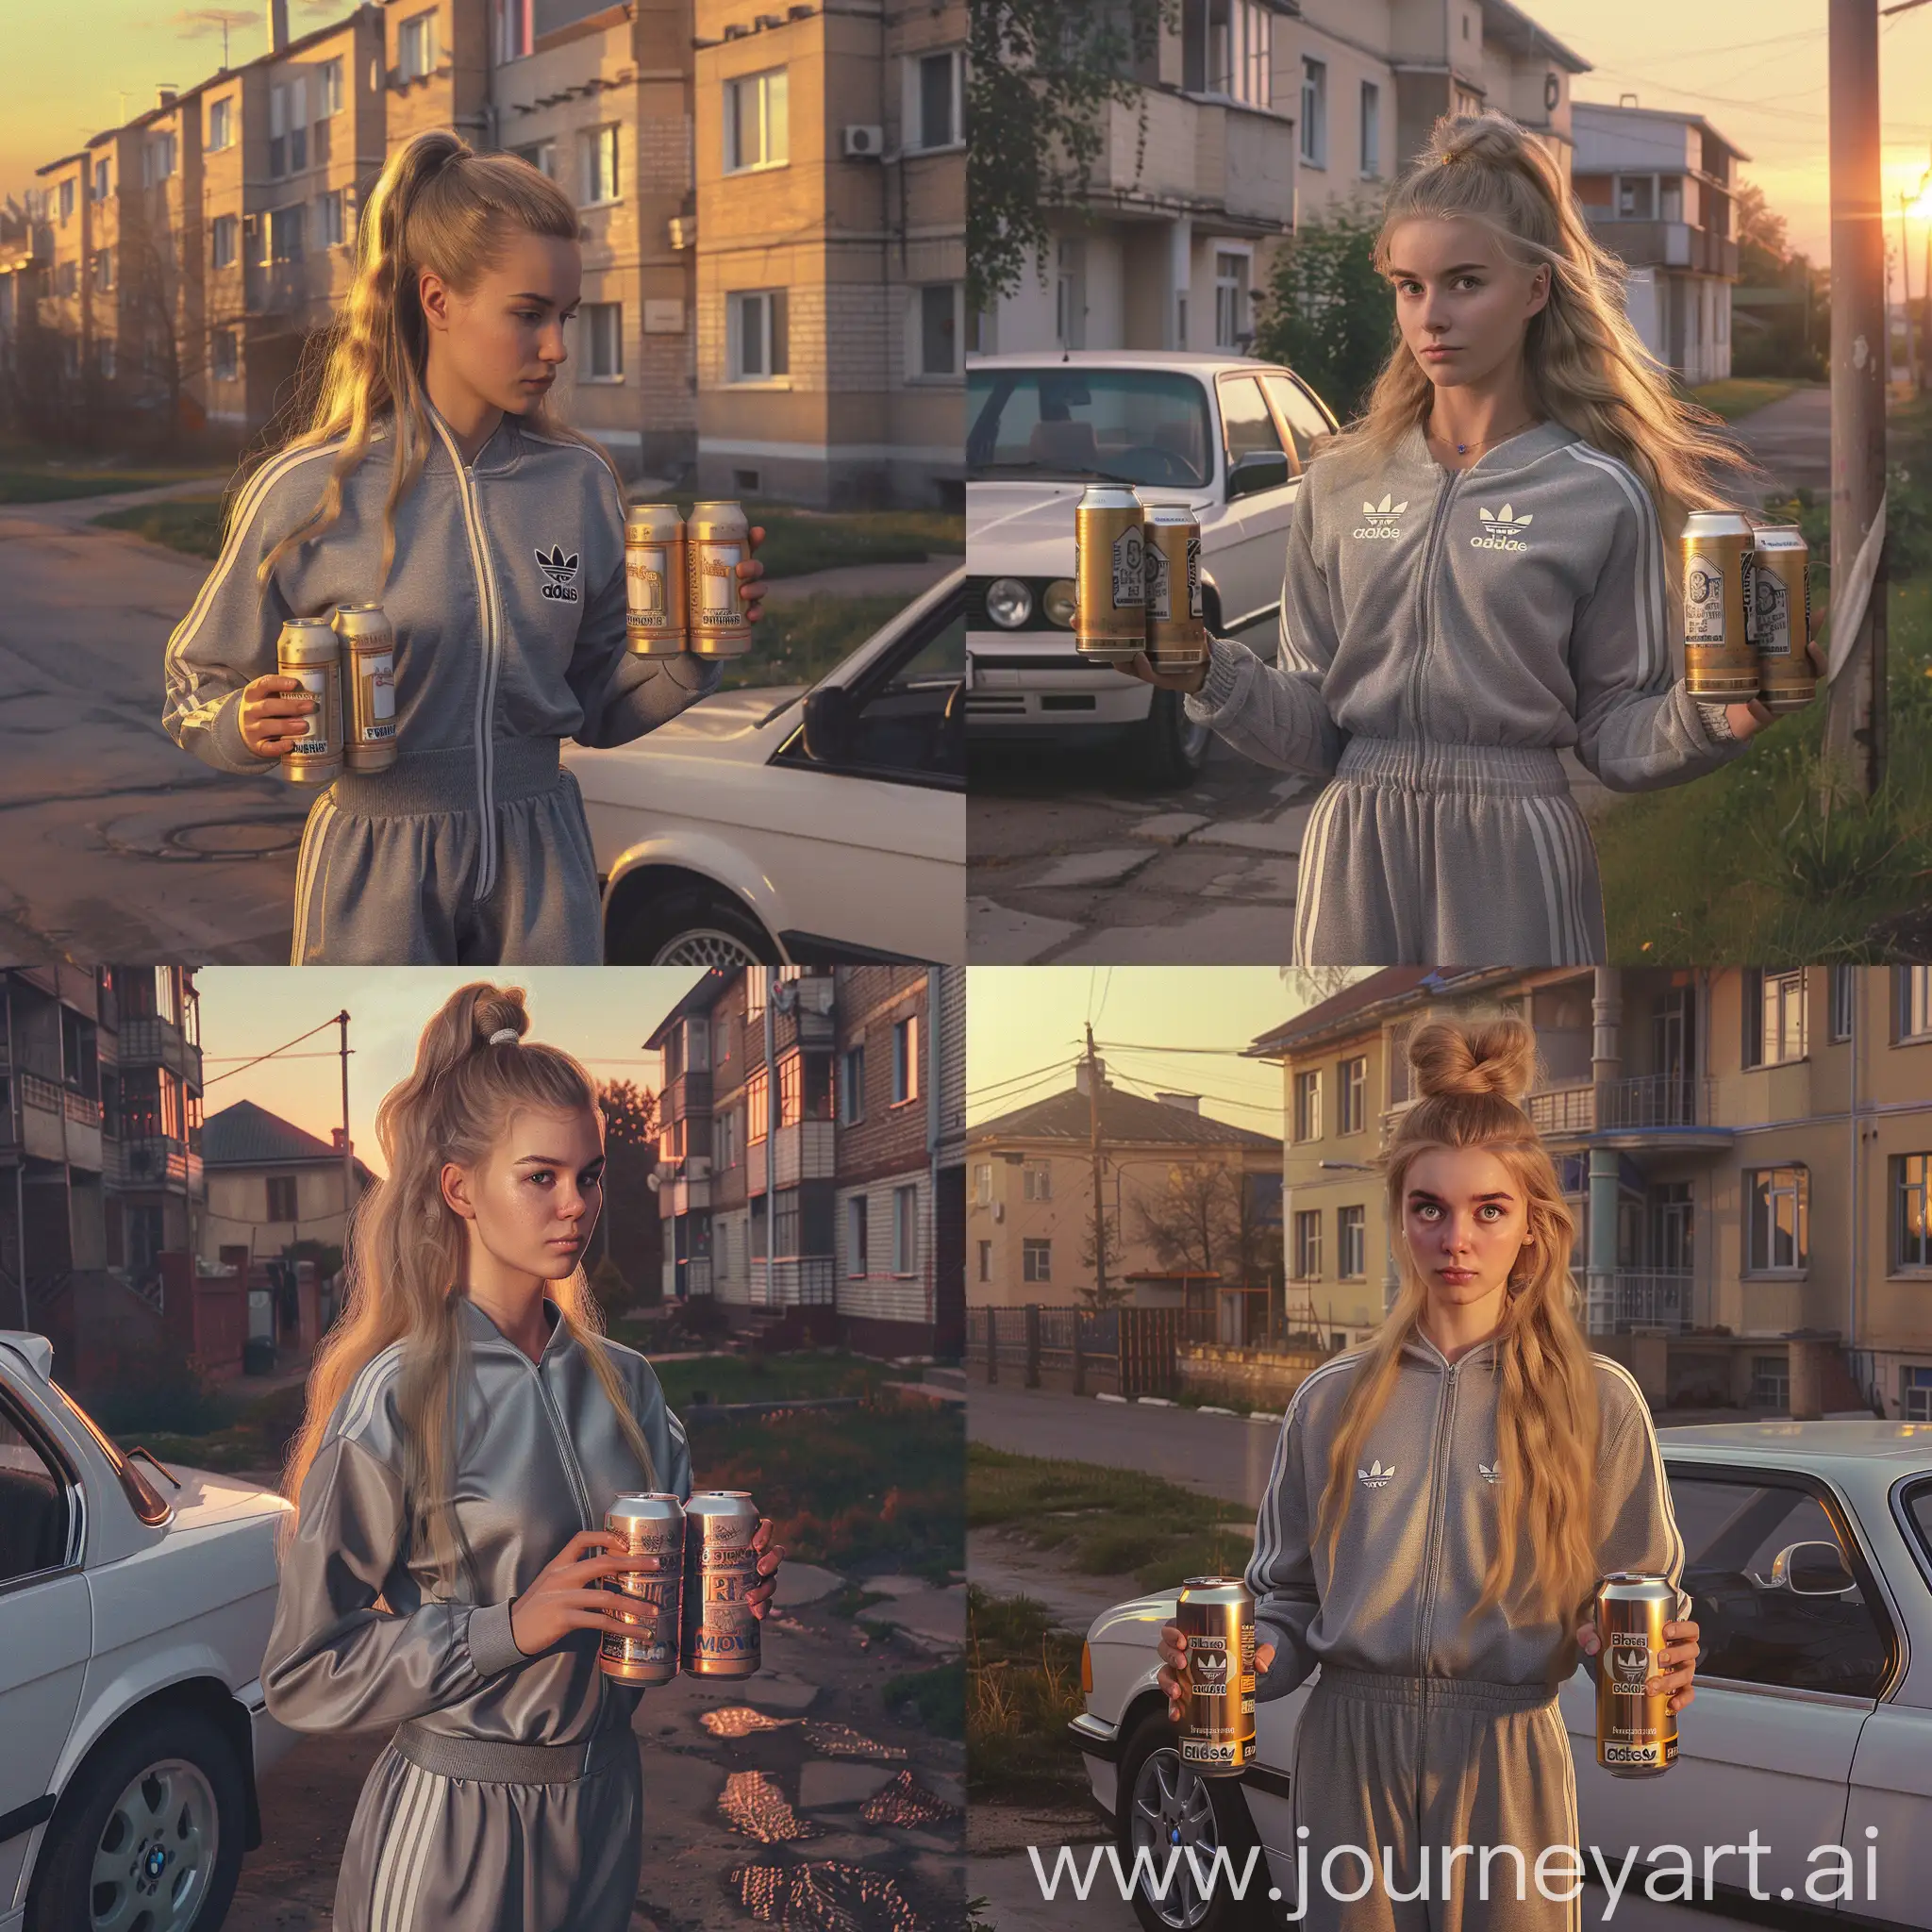 Create an image that captures the nostalgic aesthetic of the late 1980s Eastern European suburban life. The scene should feature a young woman with long blonde hair tied up in a high ponytail, wearing a grey classic Adidas tracksuit with the iconic three stripes. She is holding two large cans of beer. The backdrop is the soft glow of an evening sunset, casting warm hues over a quiet suburban street lined with old-fashioned apartment blocks. A vintage white car BMW e34 is parked nearby, hinting at the era. The overall atmosphere should evoke a sense of both serenity and gritty realism, combining elements of vintage fashion, architecture, and lifestyle in an Eastern European suburban setting.